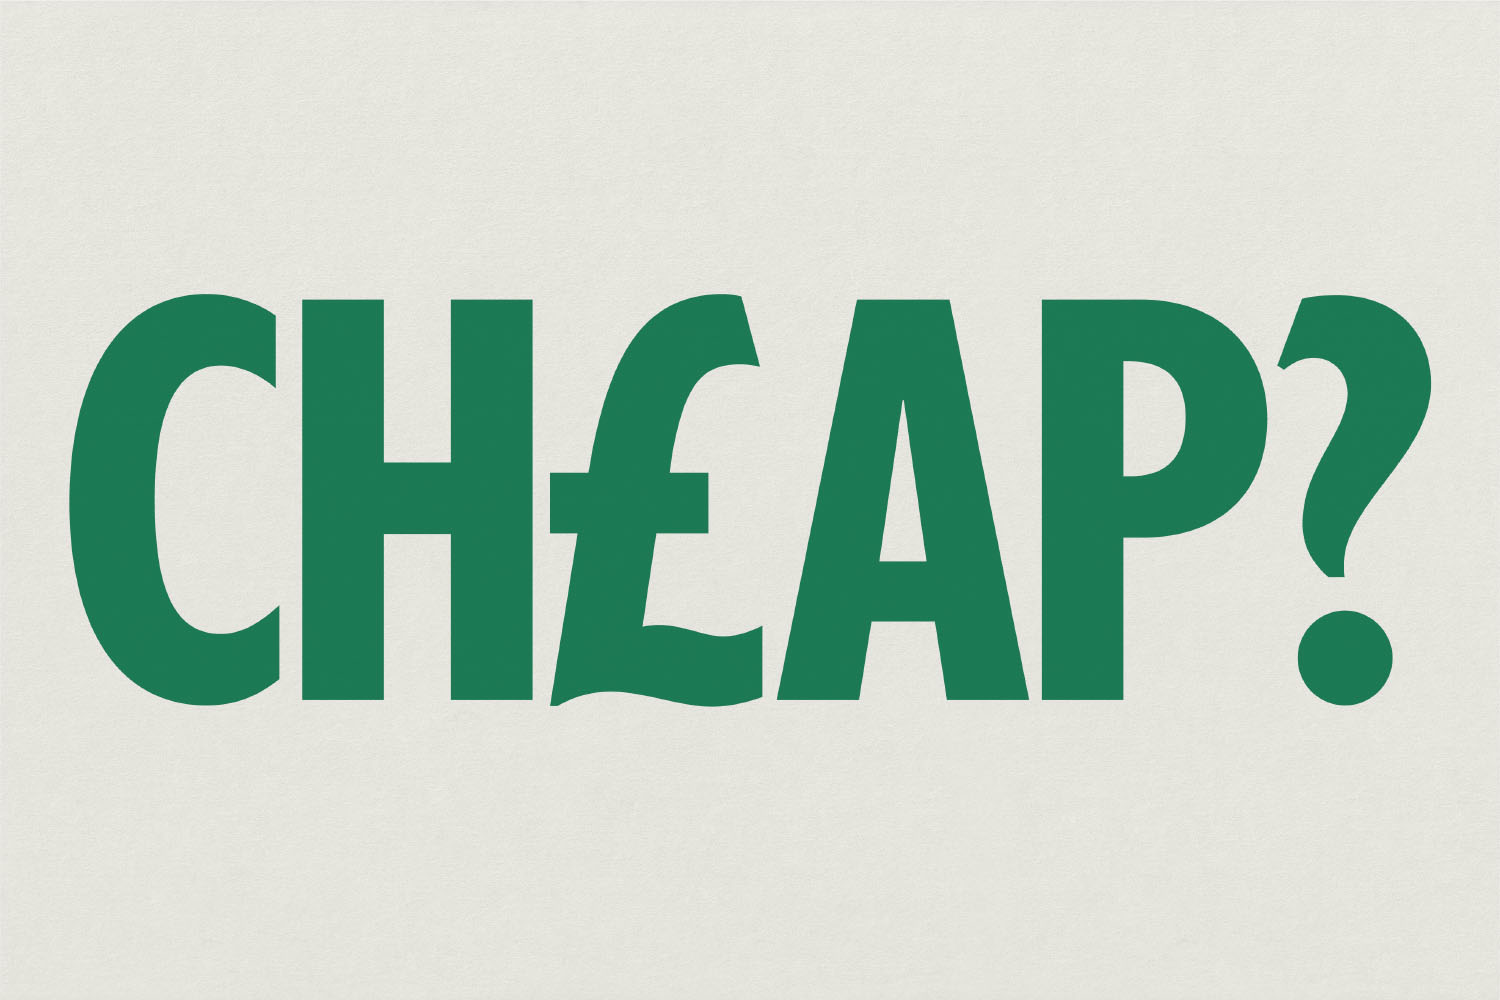 A graphic of the word Cheap, with the letter E switched for a pound symbol